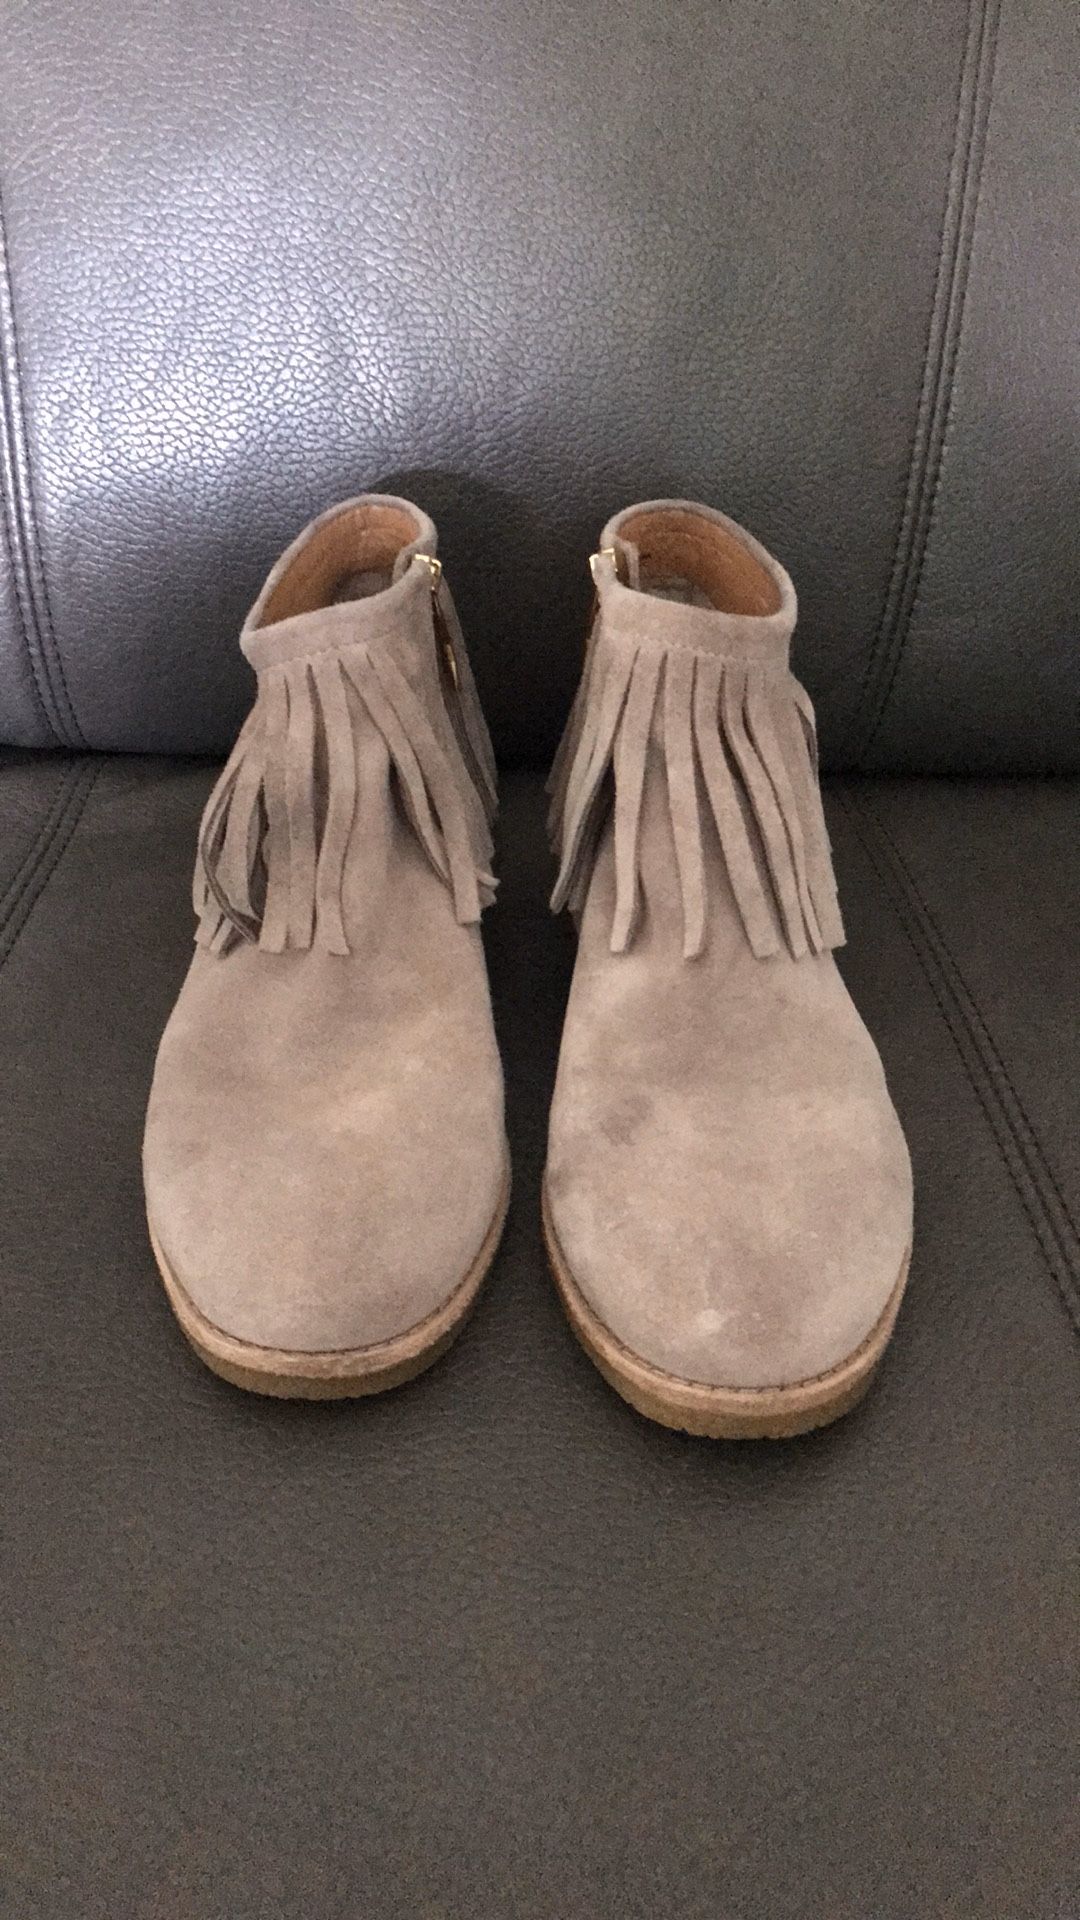 DETAILS Fringe surrounds the low shaft of these suede Kate Spade New York booties. Exposed side zip. Textured rubber sidewall and sole. Leather: Co